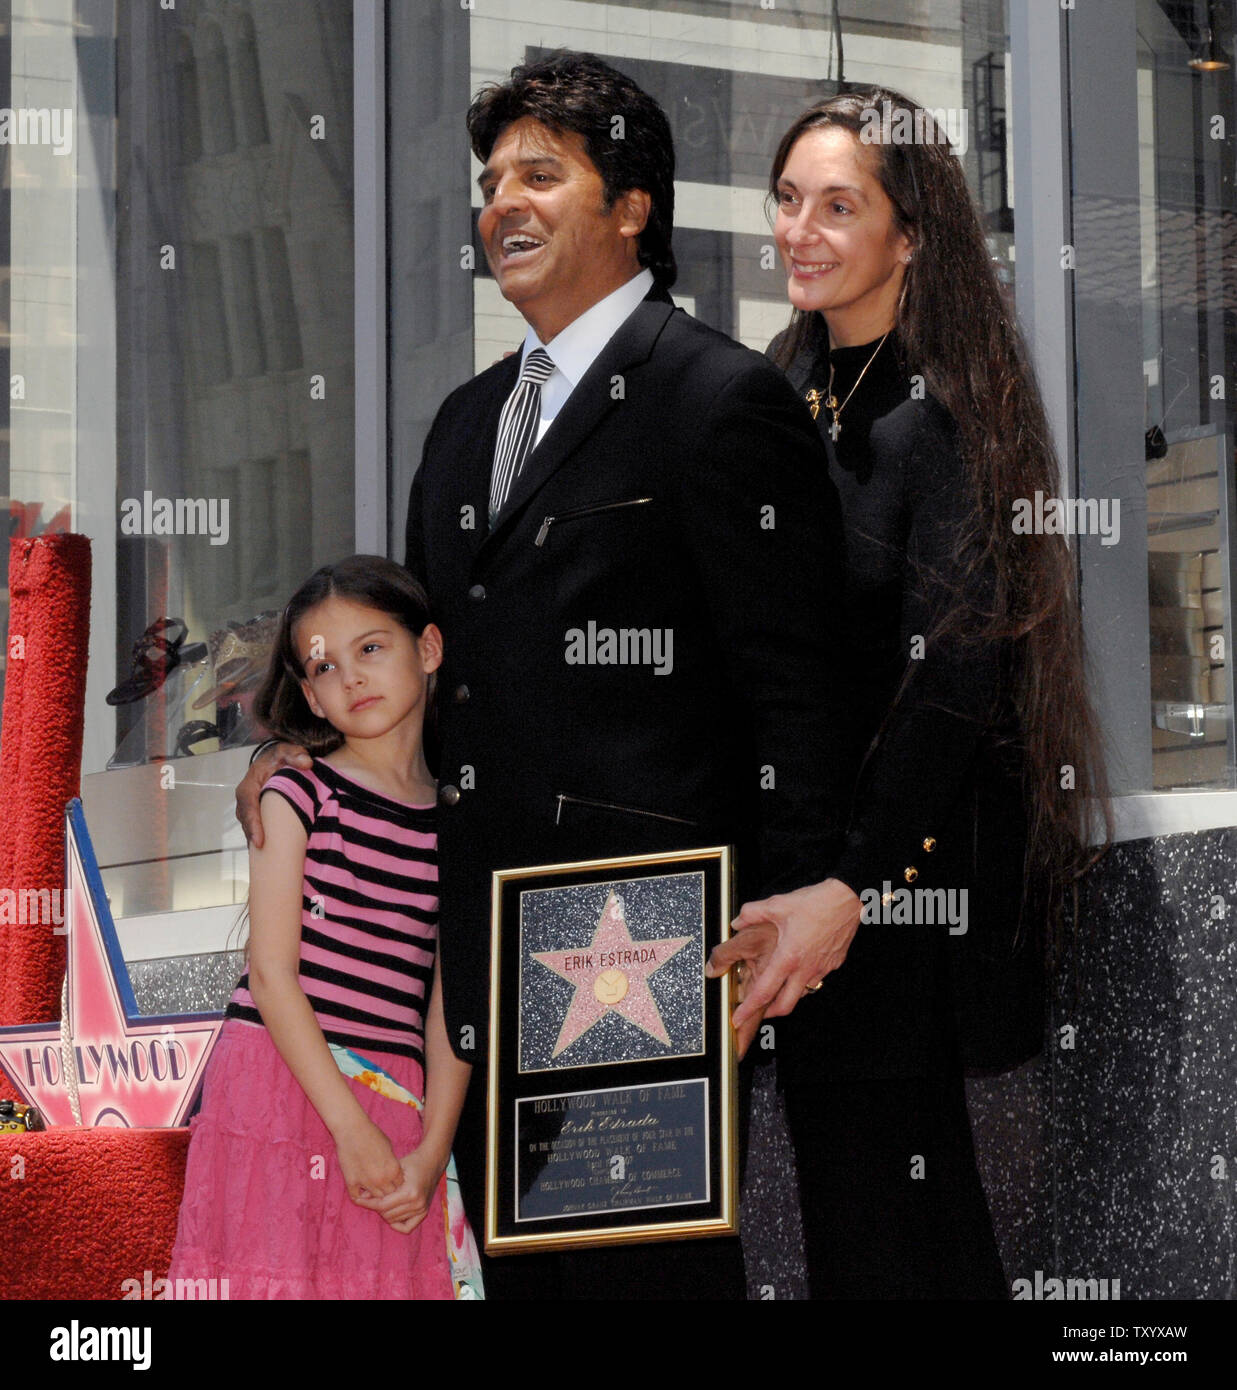 Actor Erik Estrada (R), best known for his role as Officer Frank 'Ponch' Poncherello in the 1977-1983 television series 'CHiPS' reacts with daughter Francesca and wife Nanette during ceremonies unveiling Estrada's star on the Hollywood Walk of Fame in Los Angeles on April 19, 2007. (UPI Photo/Jim Ruymen) Stock Photo